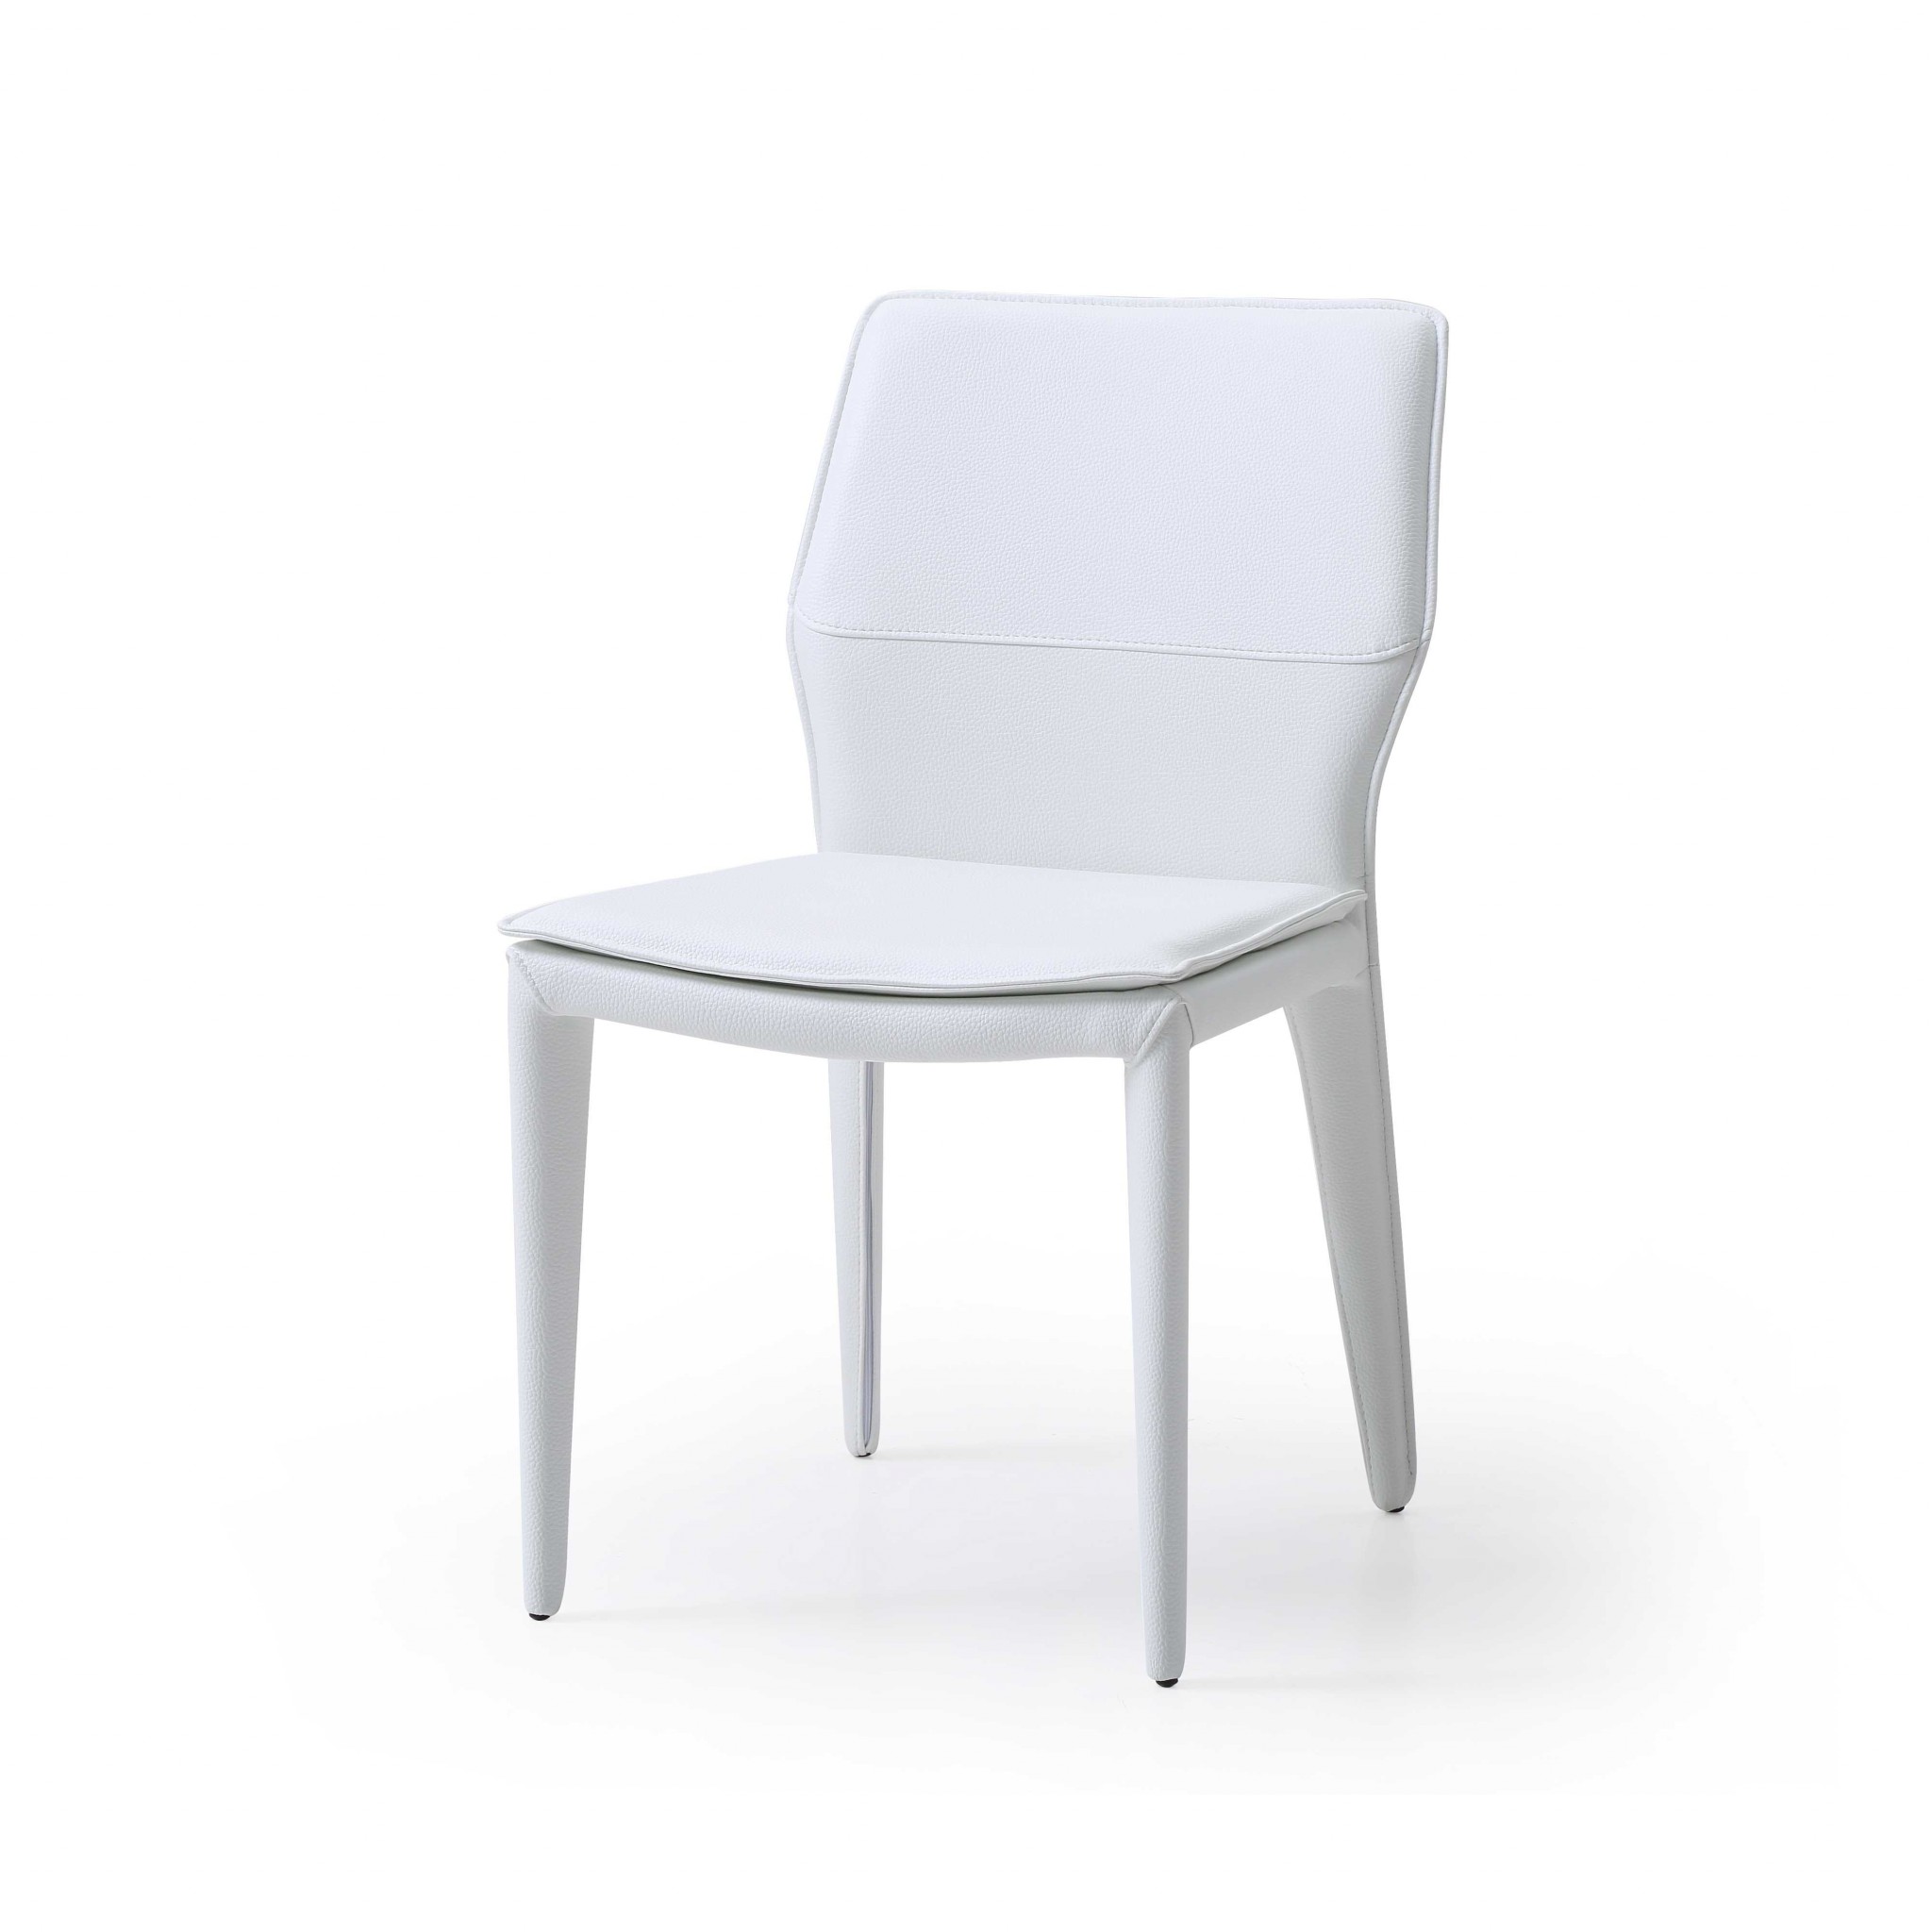 19" X 24" X 33" White Faux Leather or Metal Dining Chair